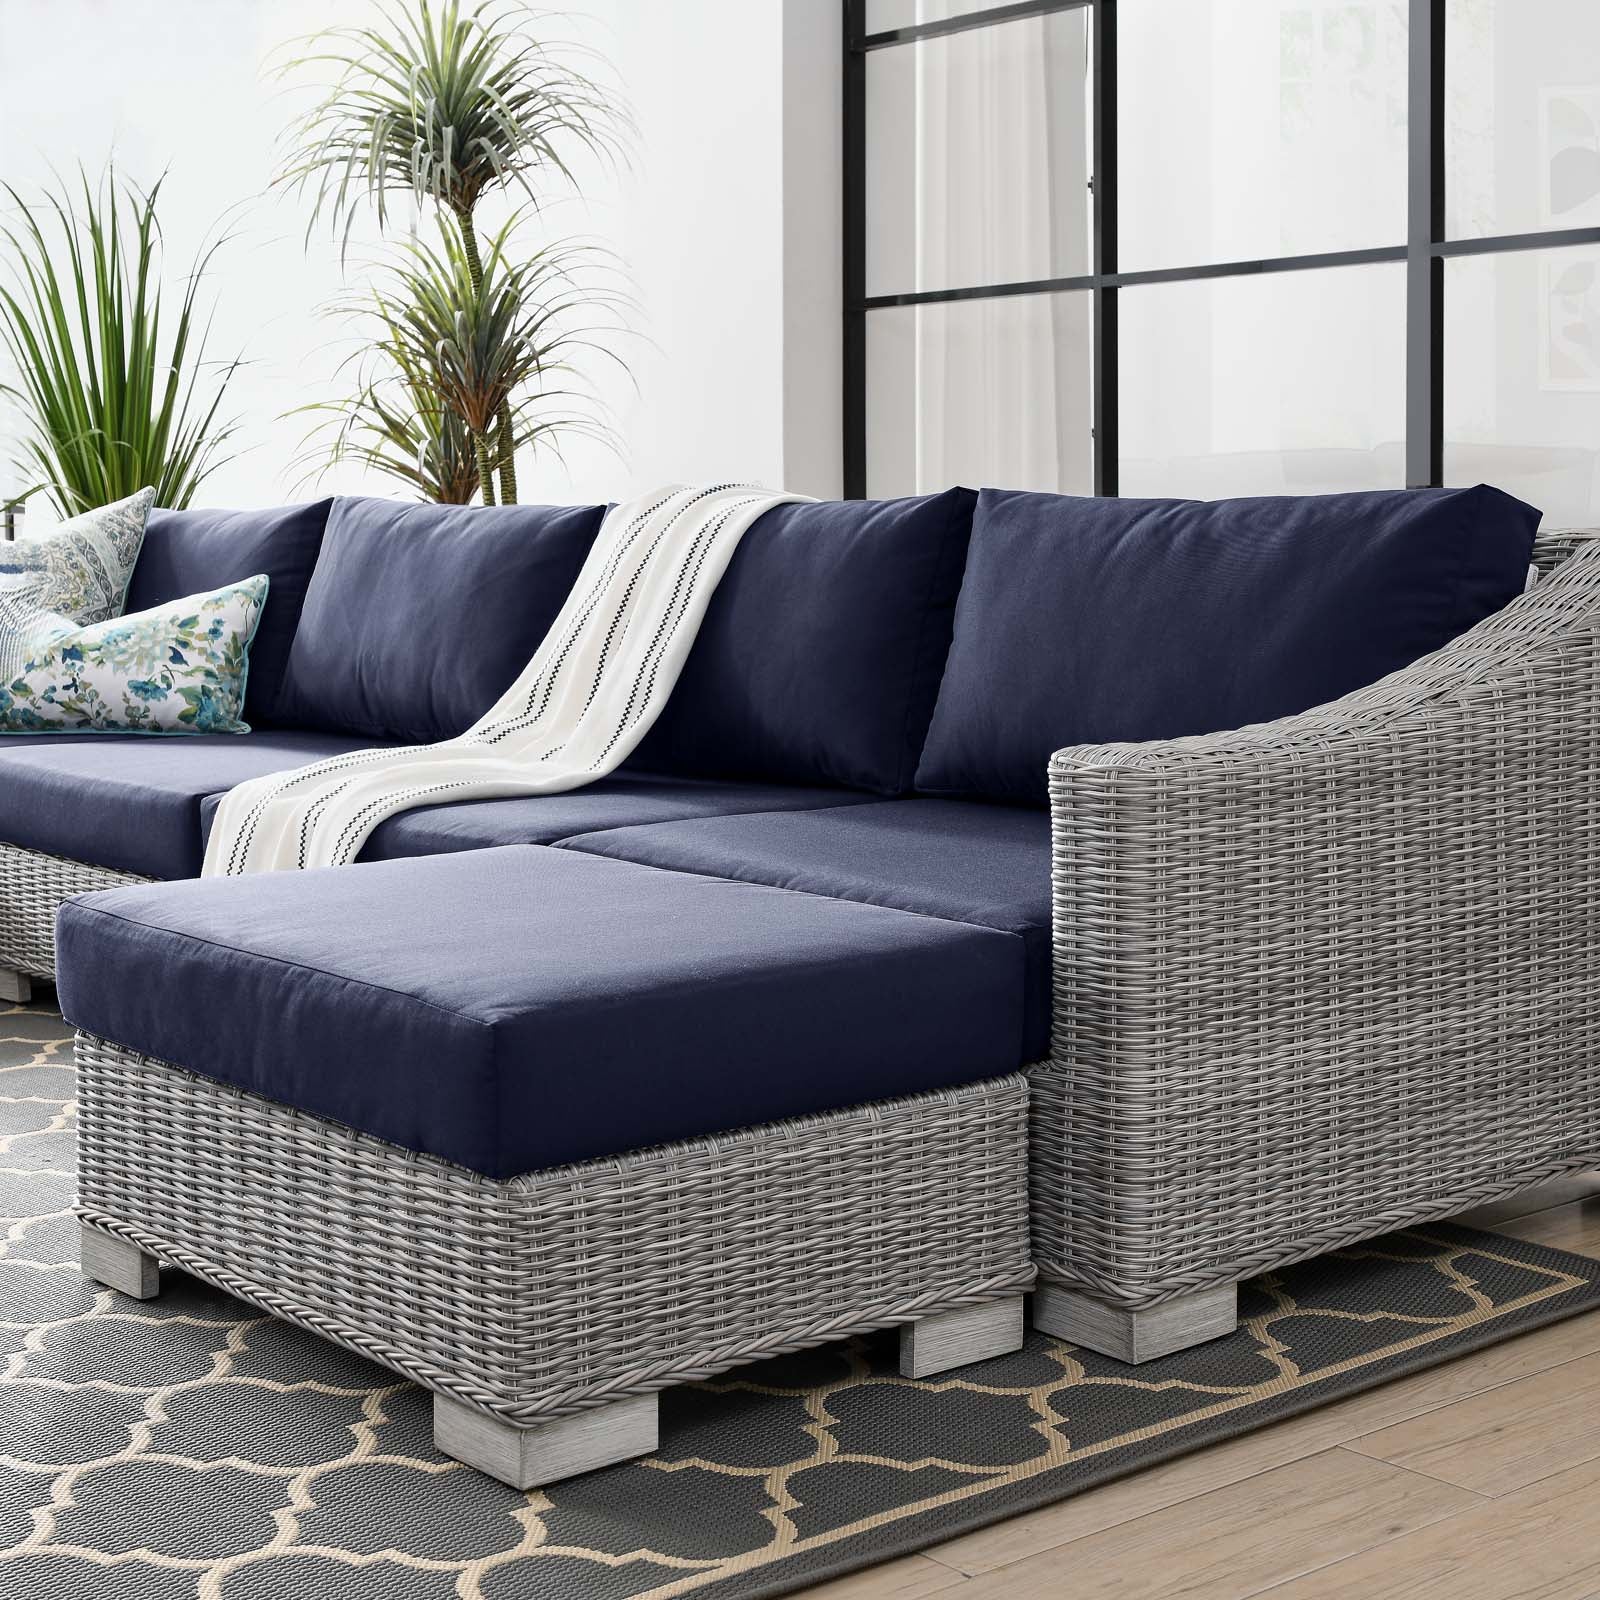 Conway Outdoor Patio Wicker Rattan 6-Piece Sectional Sofa Furniture Set - East Shore Modern Home Furnishings